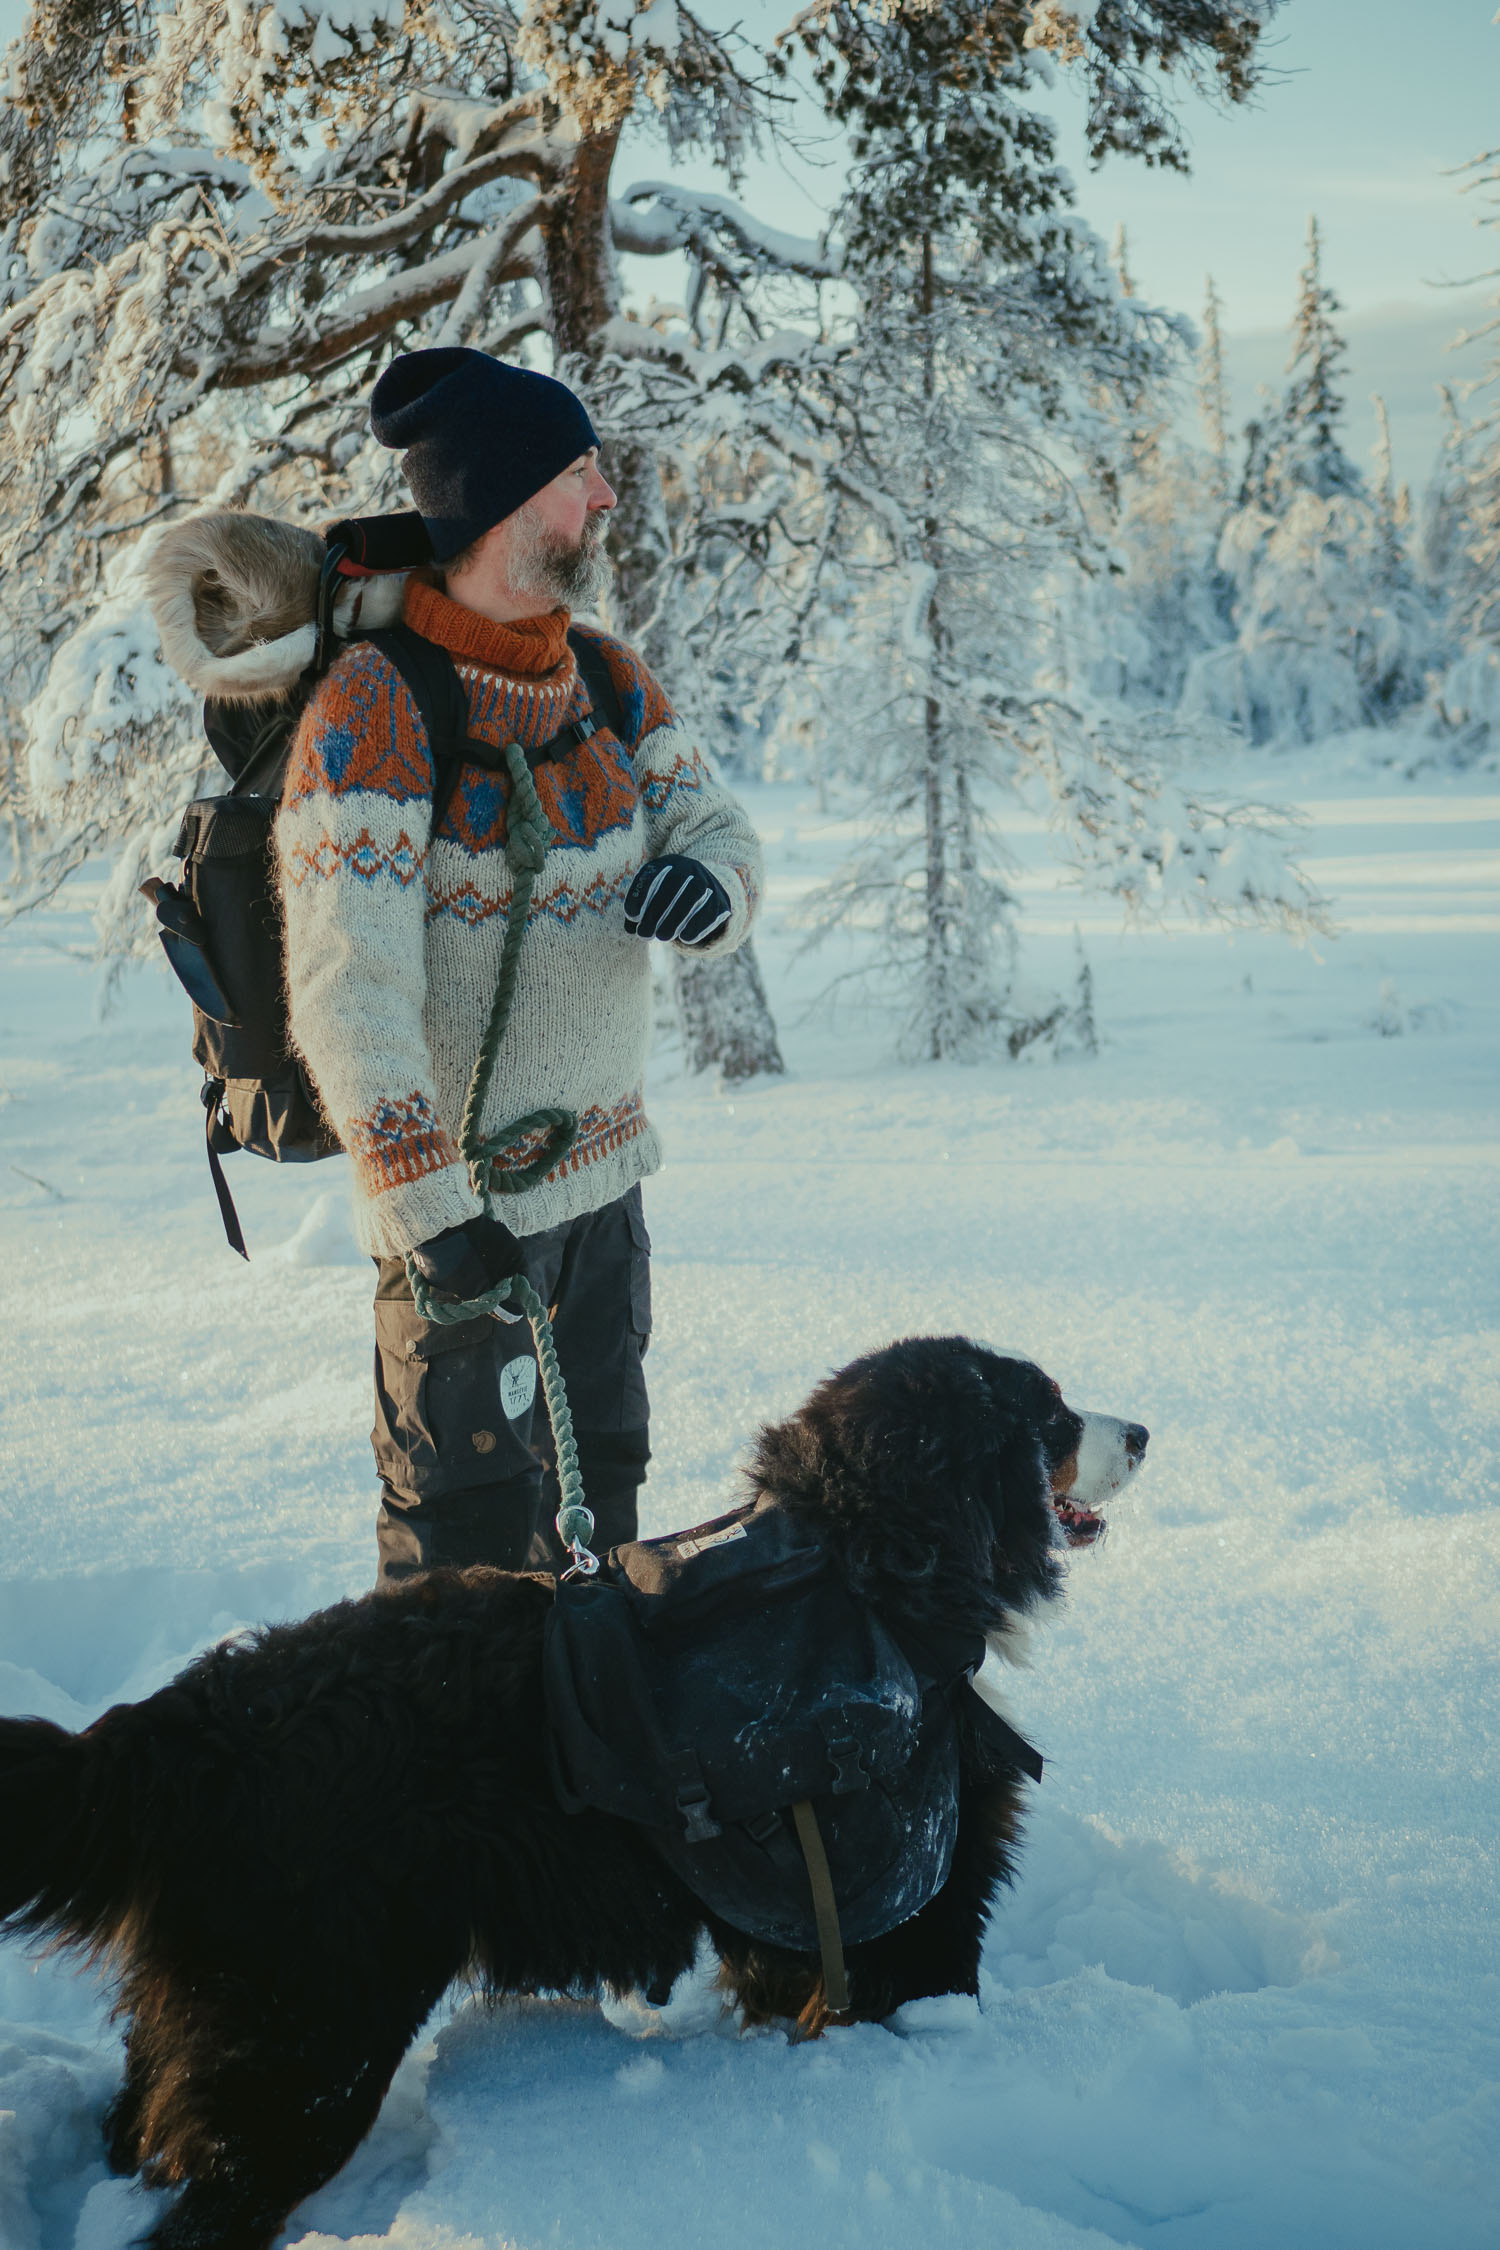 An outdoor guide and his dog in the snow